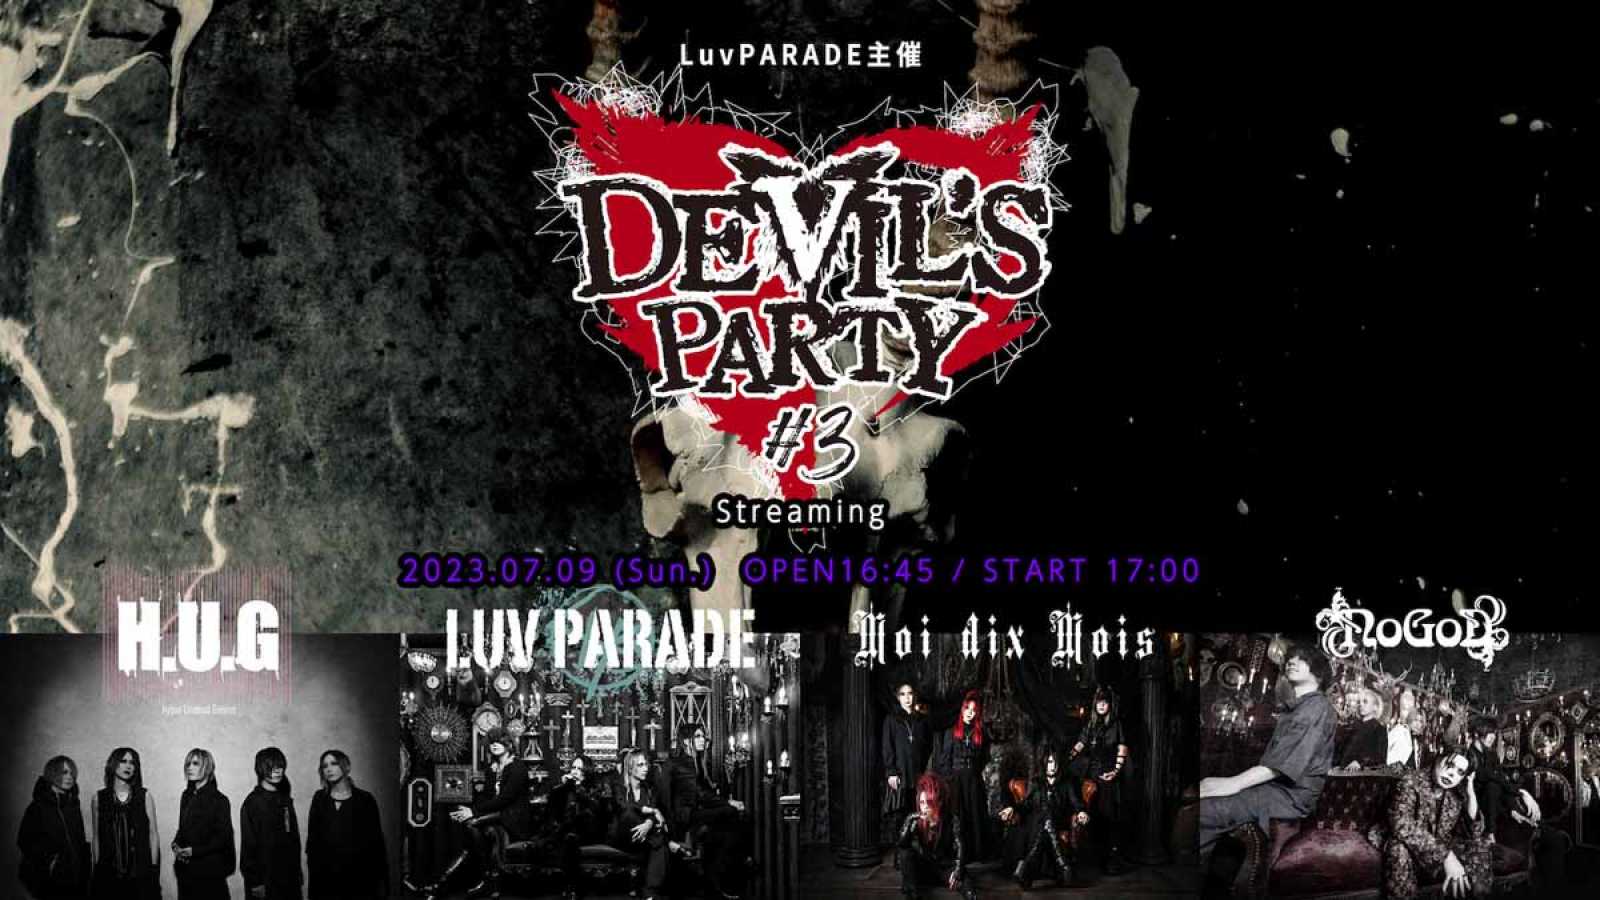 Luv PARADE to Live Stream "DEVIL'S PARTY #3" Worldwide © Luv PARADE. All rights reserved.